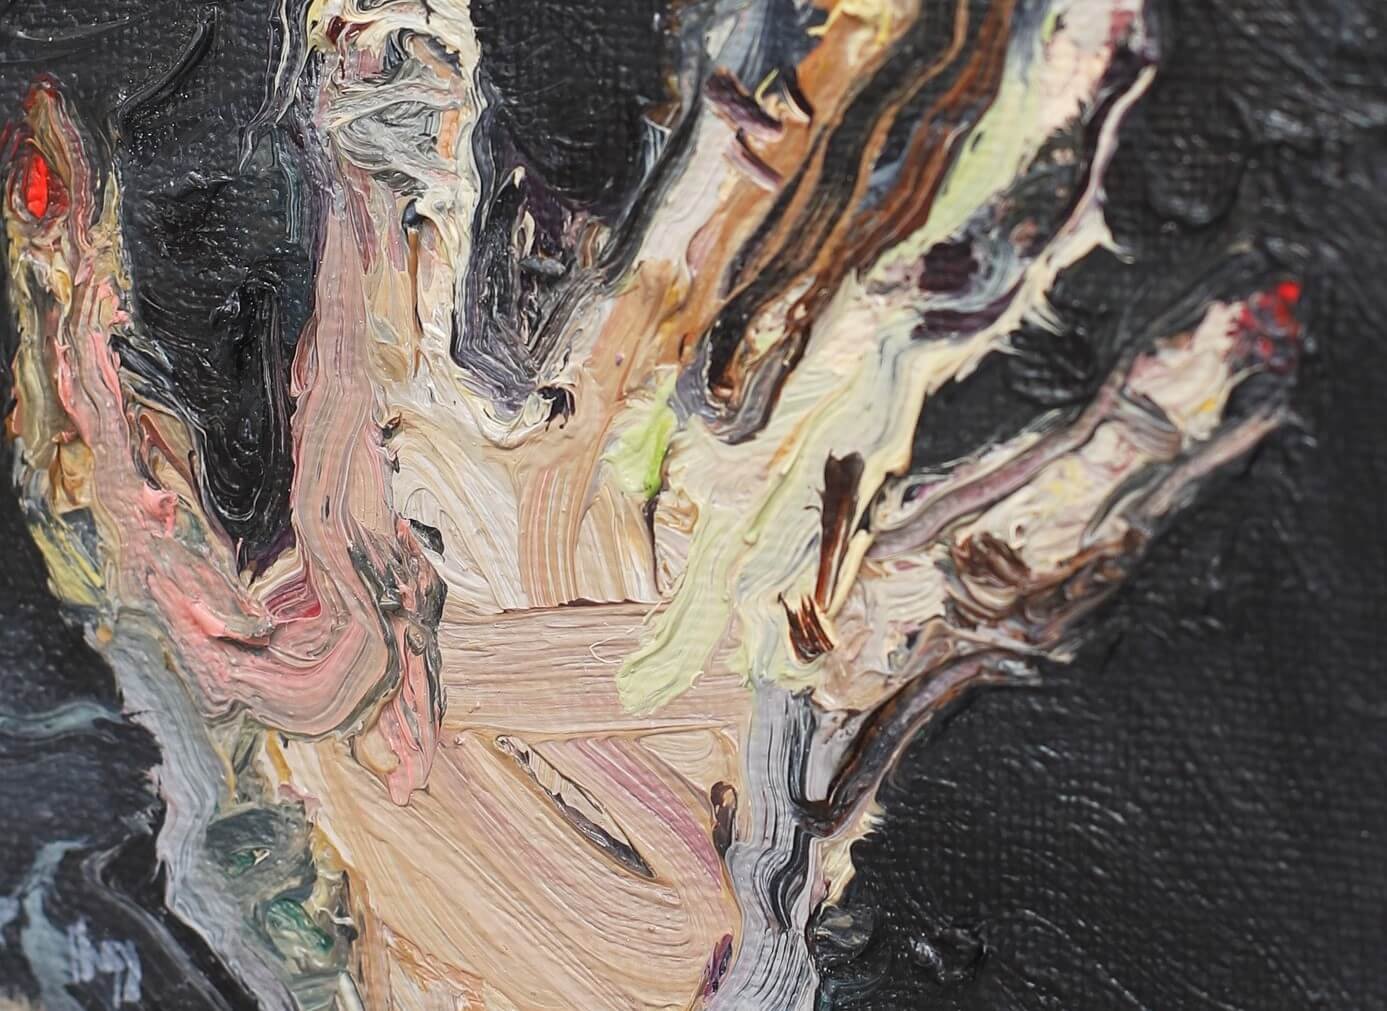 typing-1-impasto-oil-painting-of-hands-small-painting-on-canvas.jpg